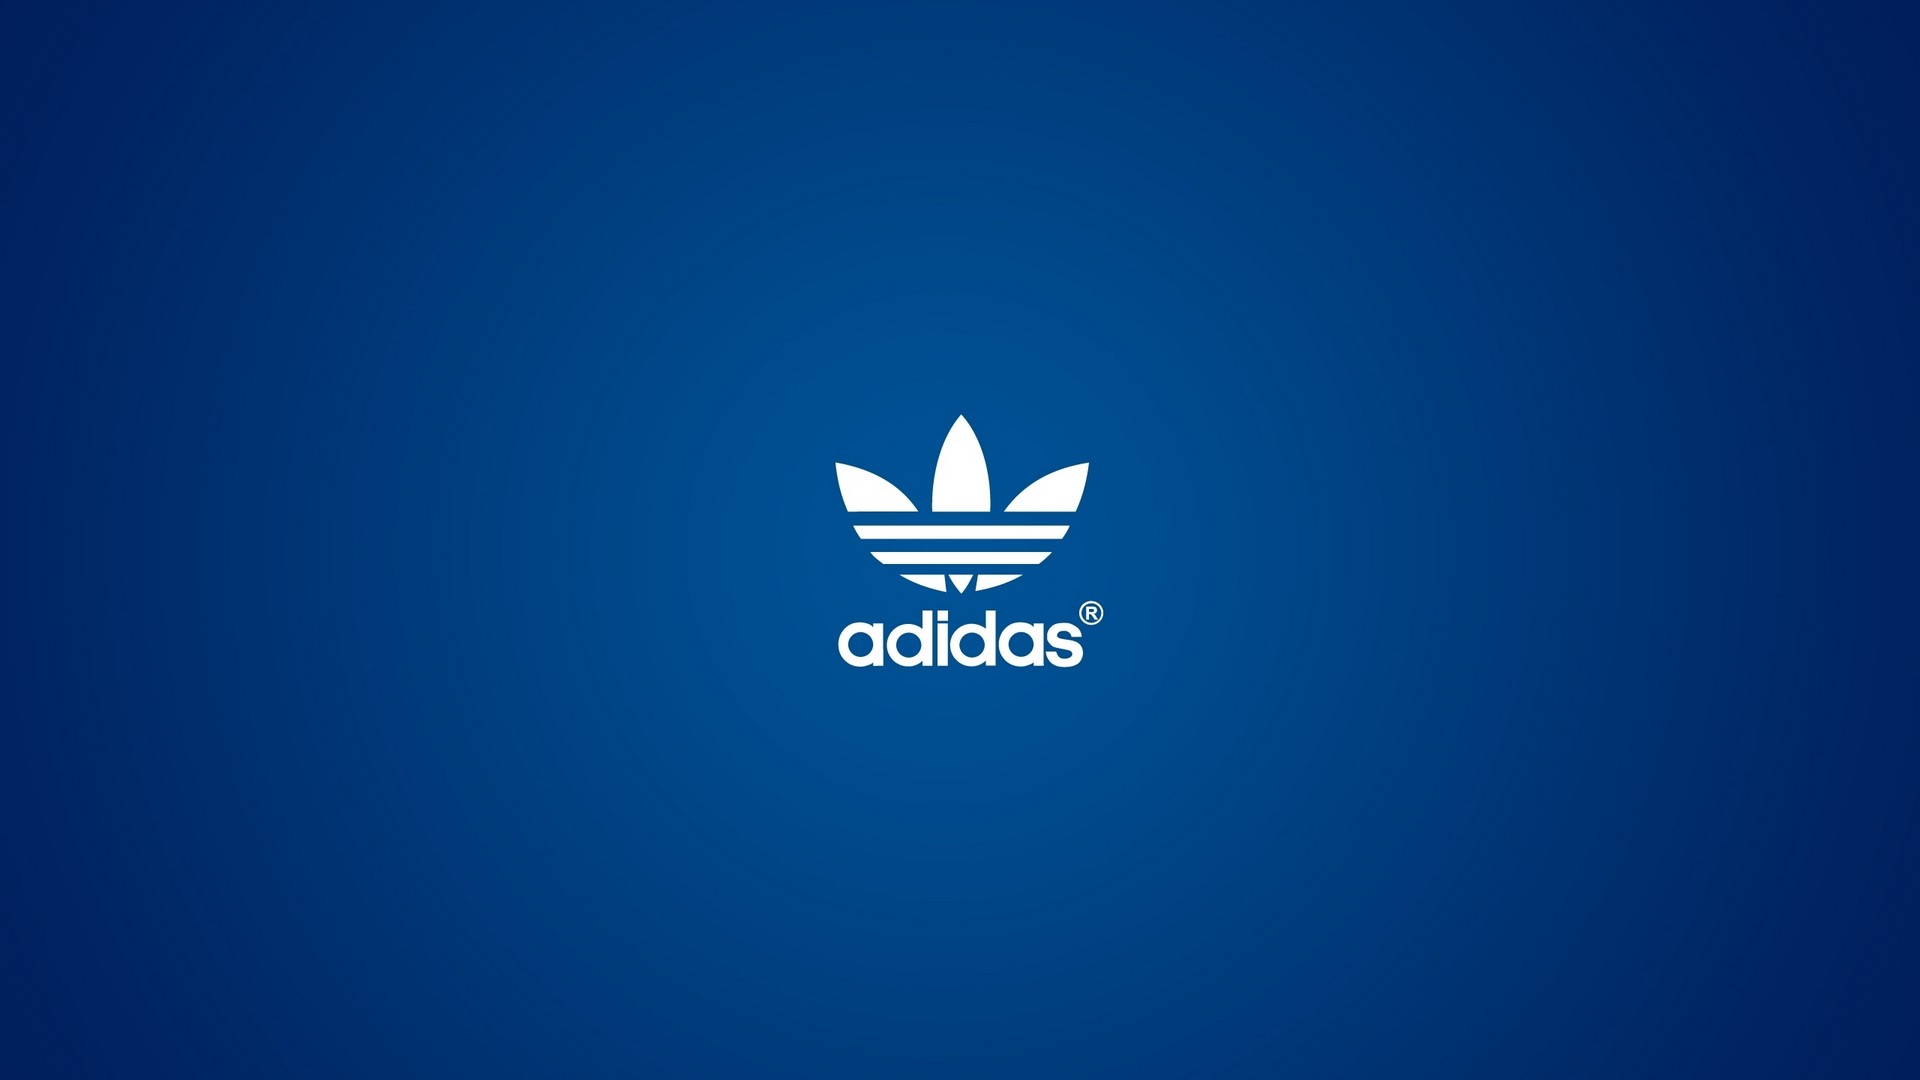 Adidas HD Wallpaper with high-resolution 1920x1080 pixel. You can use this wallpaper for your Desktop Computer Backgrounds, Mac Wallpapers, Android Lock screen or iPhone Screensavers and another smartphone device